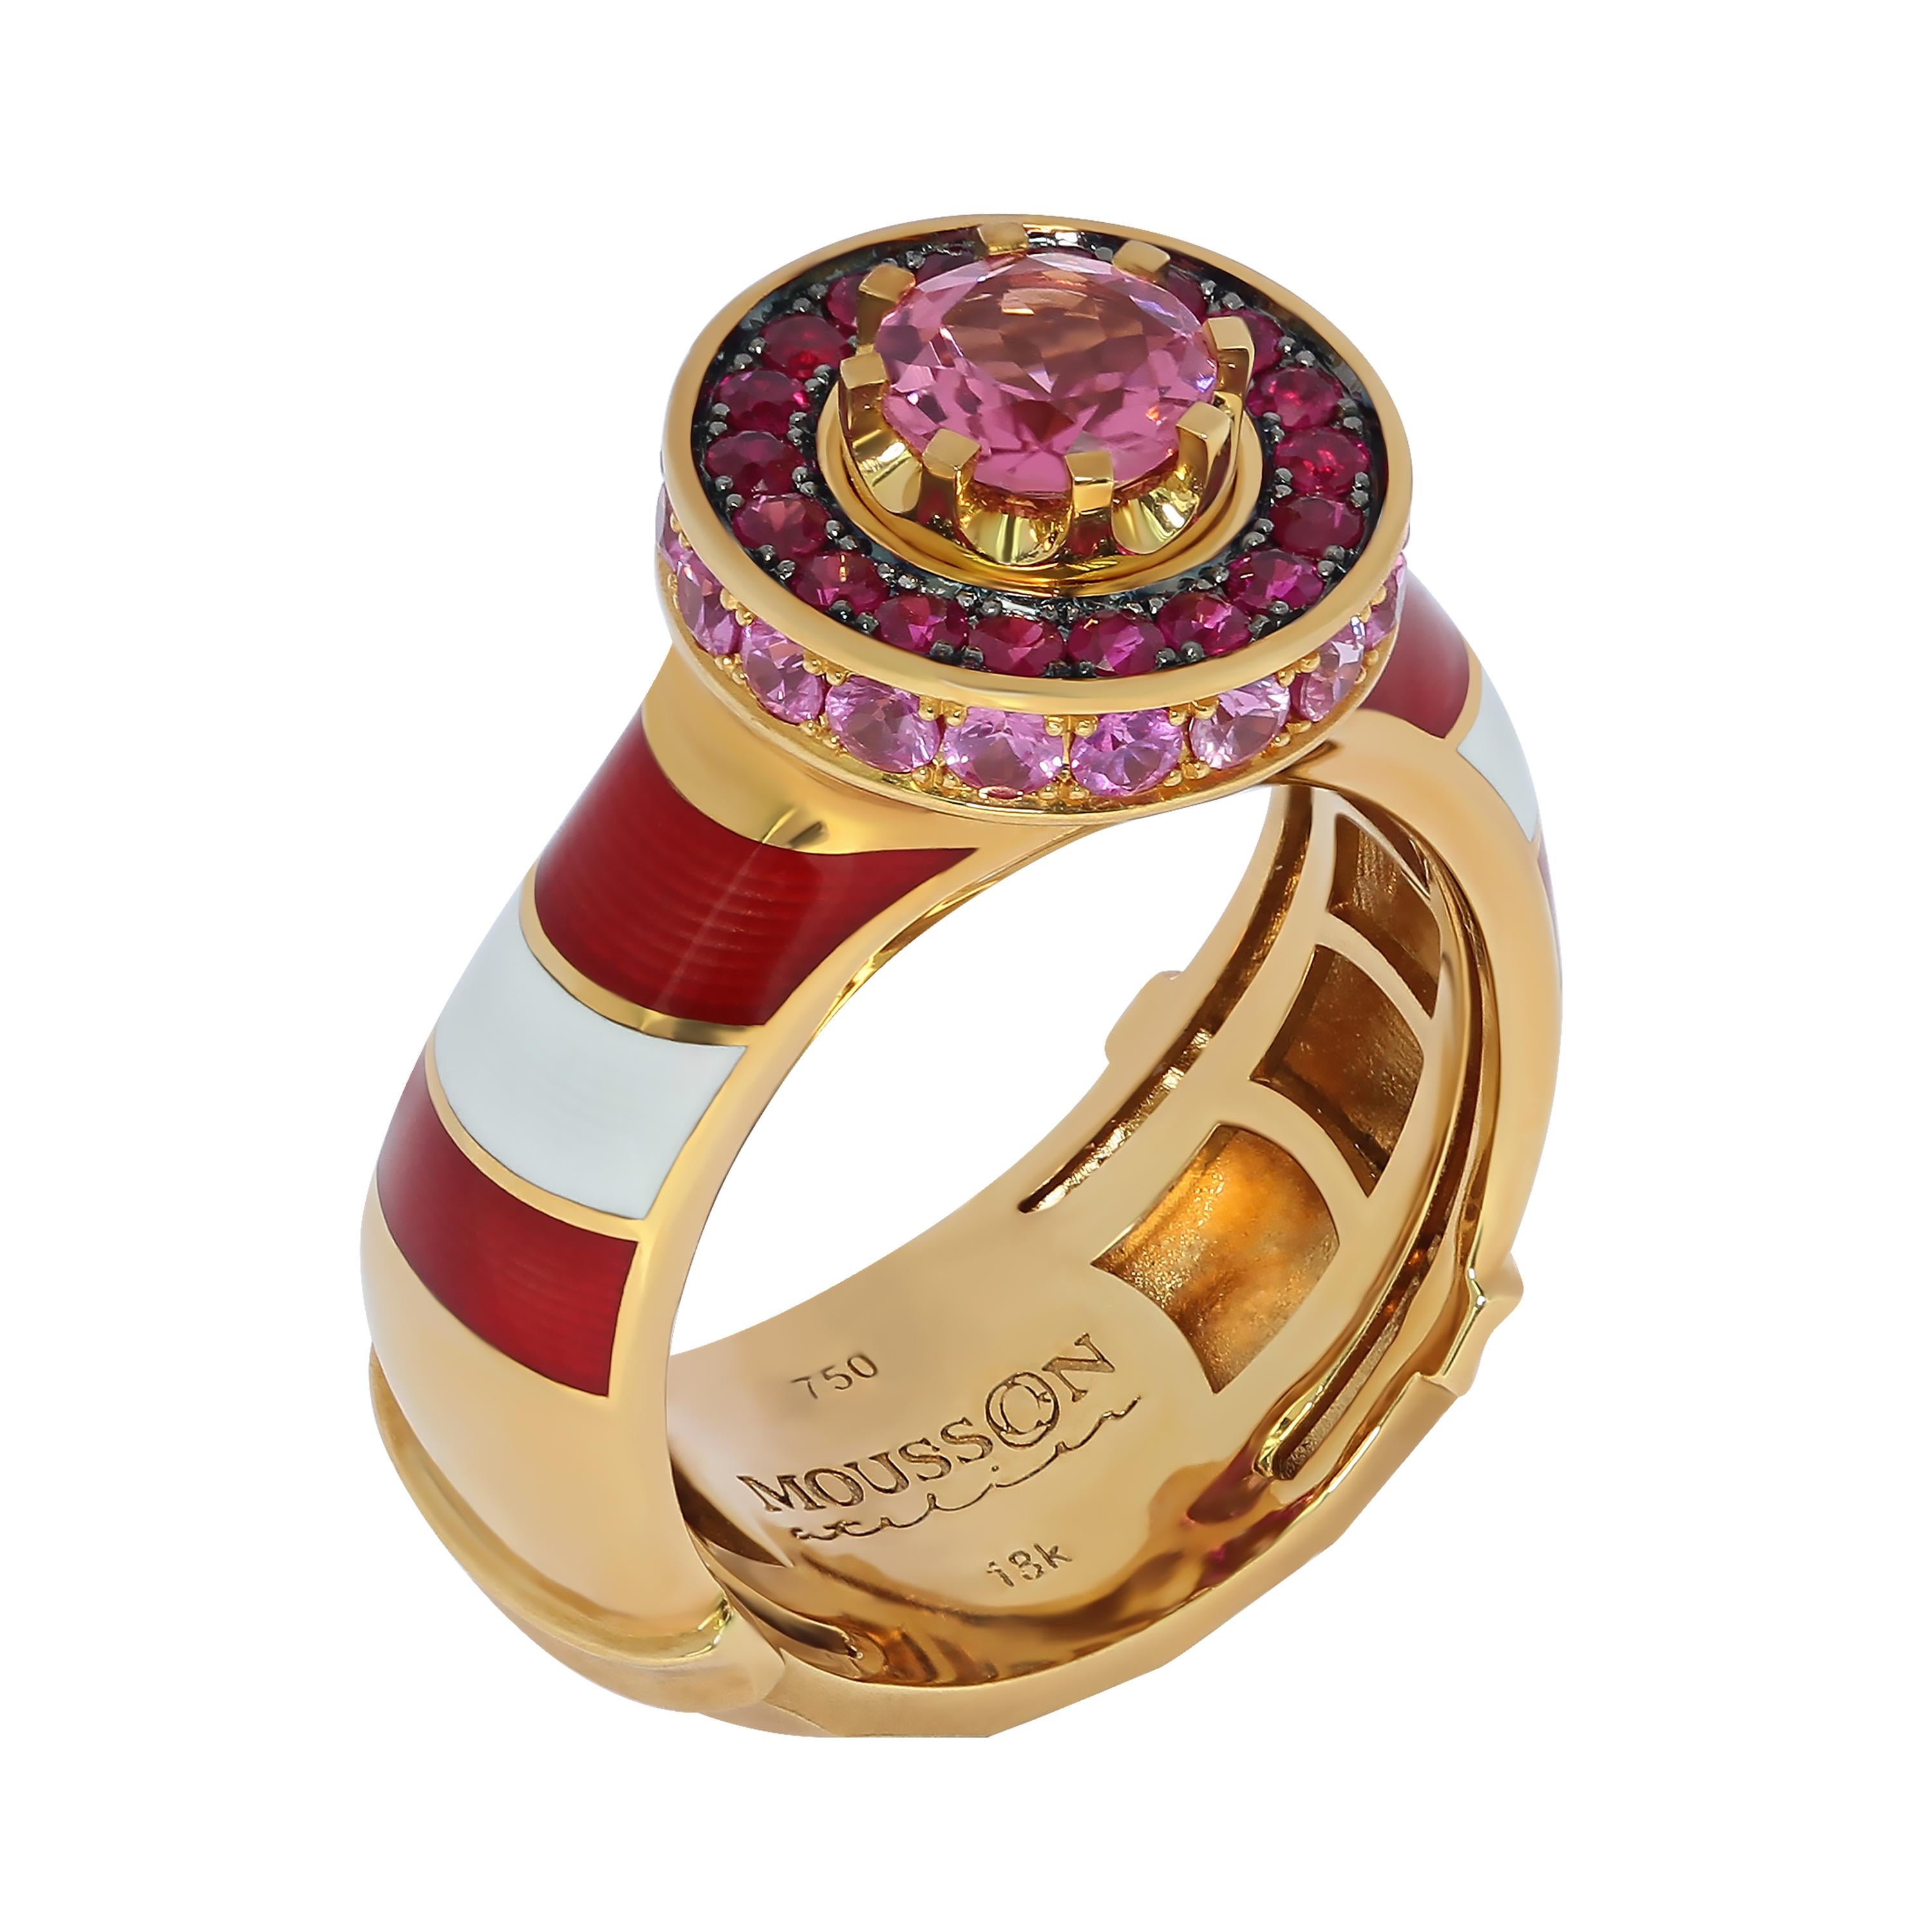 Pink Tourmaline Ruby Sapphire 18 Karat Yellow Gold Lighthouse Ring
The lighthouse is the place where the light is born and after a moment the light dies and it repeats again and again. Since the days of the famous Alexandria Lighthouse, the towers